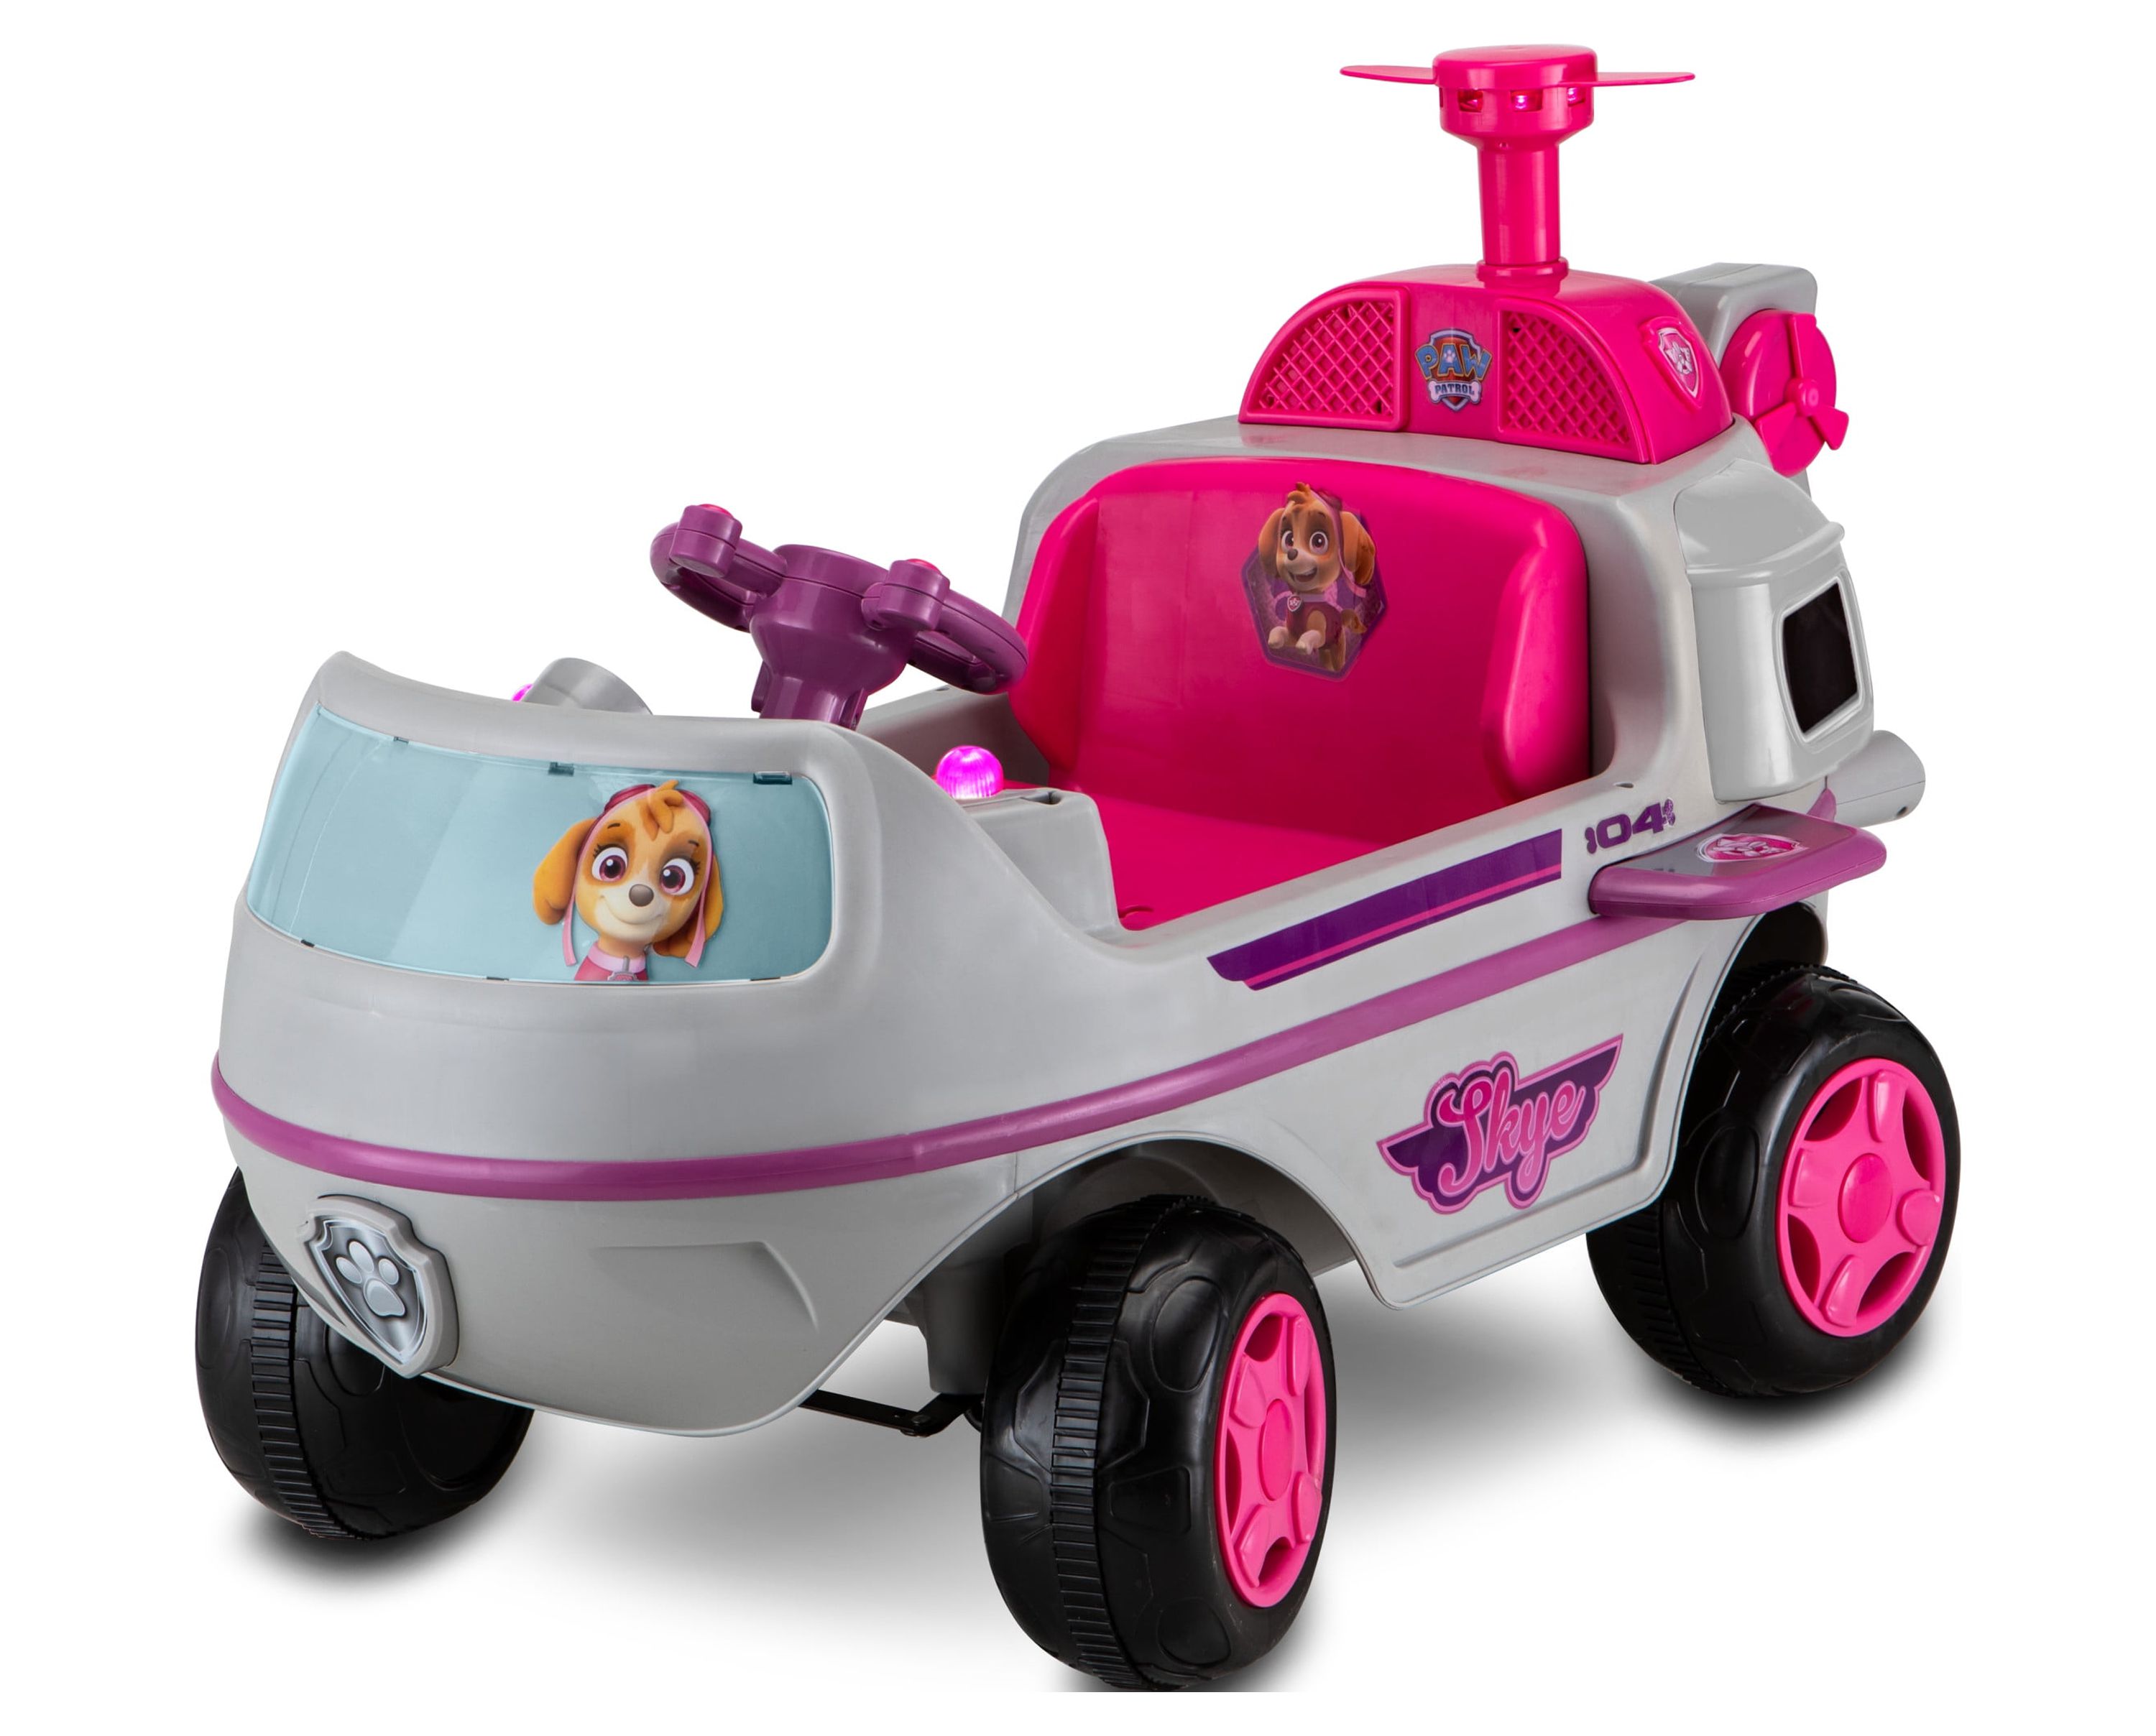 Nickelodeon’s PAW Patrol: Skye Helicopter, 6-Volt Ride-On Toy by Kid Trax - image 1 of 8